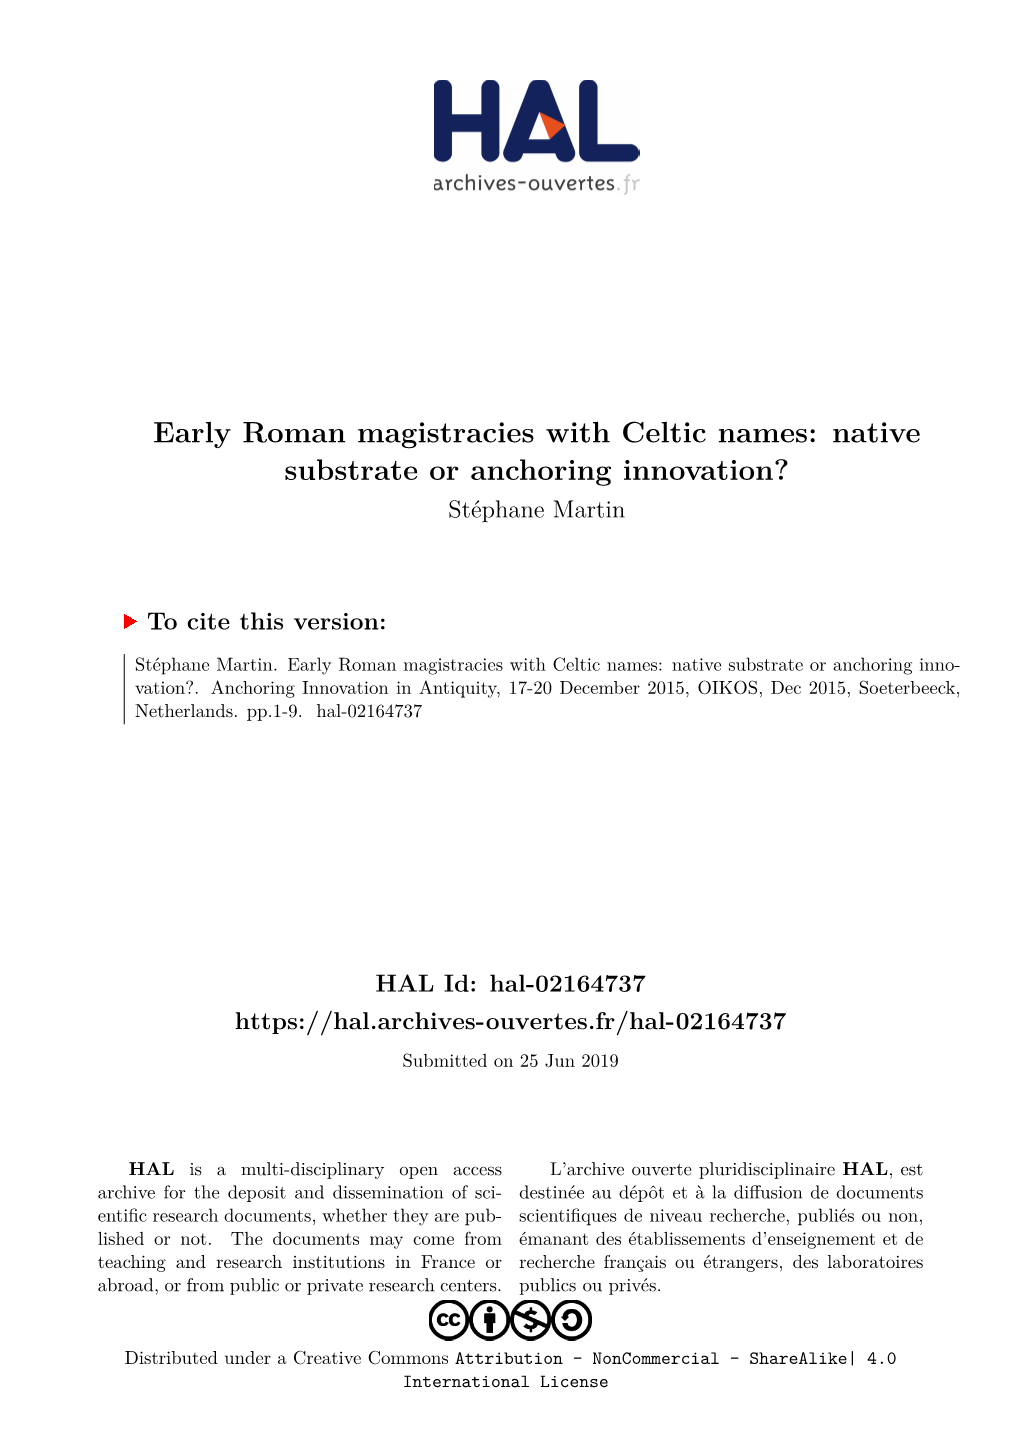 Early Roman Magistracies with Celtic Names: Native Substrate Or Anchoring Innovation? Stéphane Martin